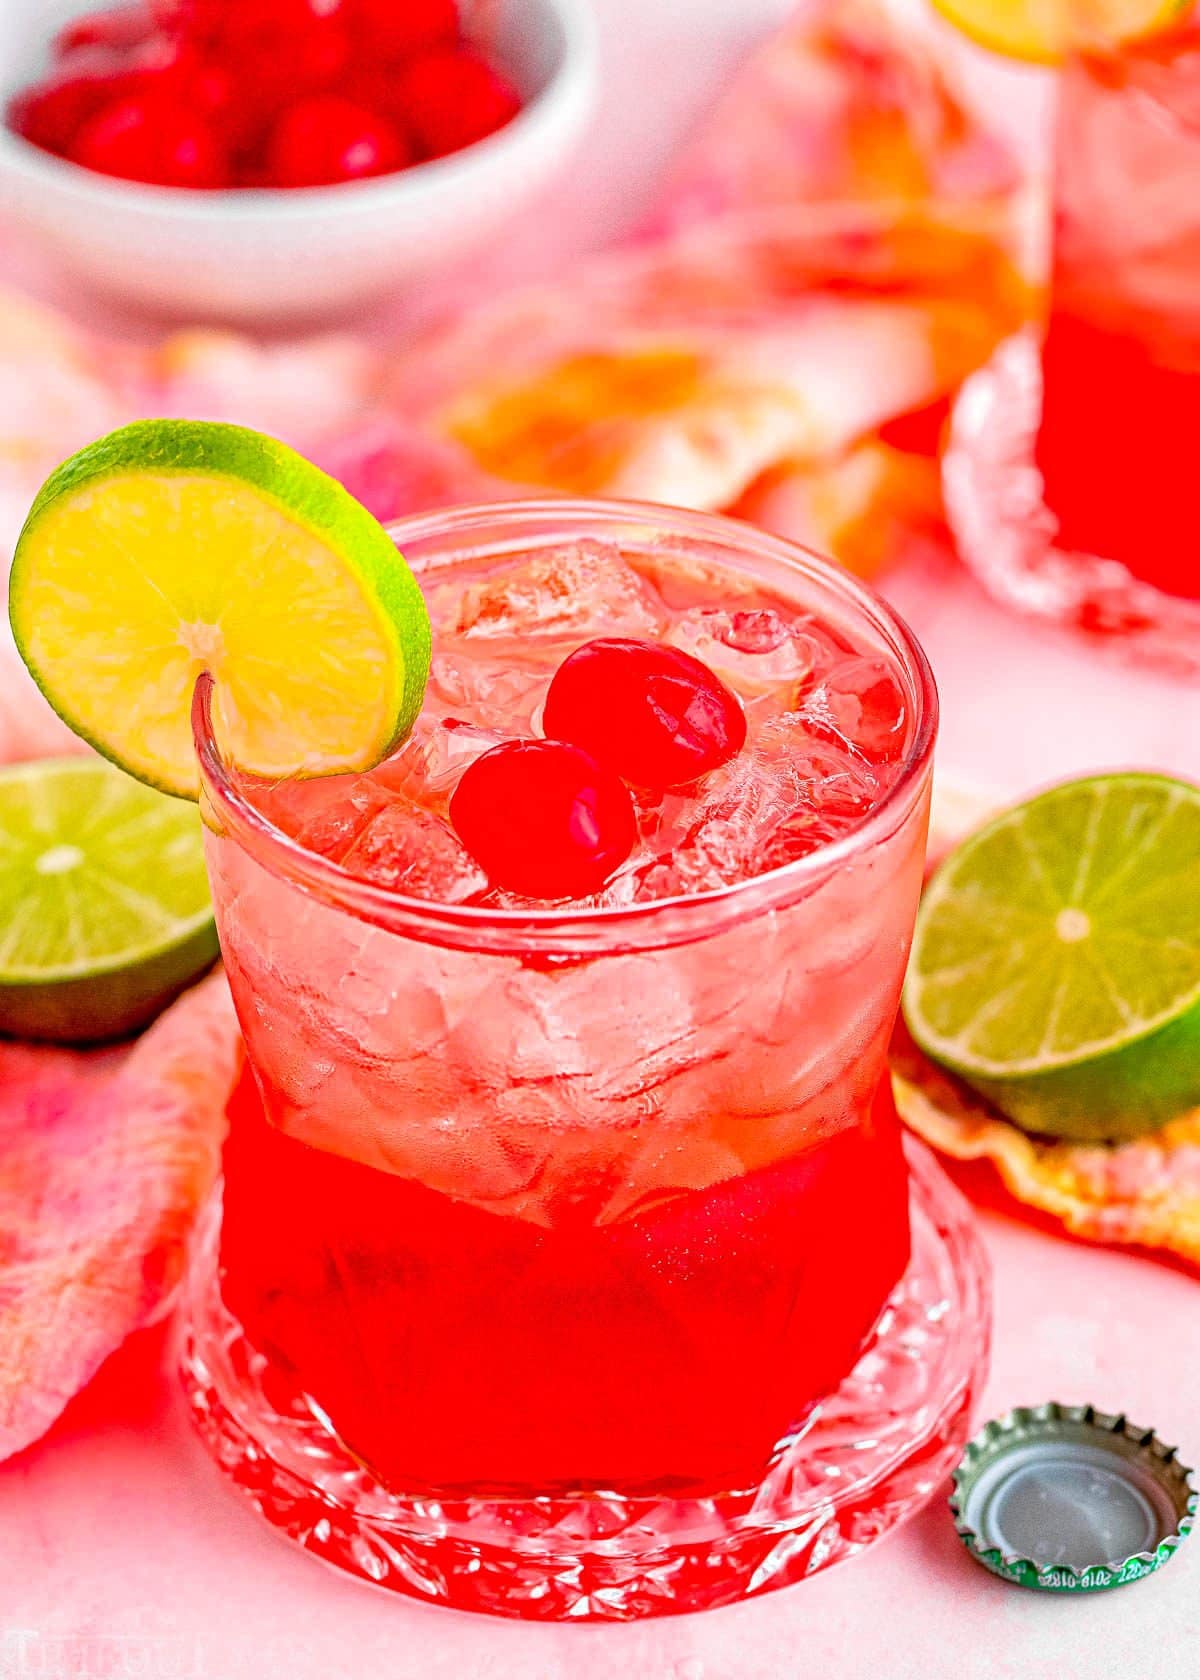 dirty shirley temple cocktail in a short glass garnished with a slice of lime and two maraschino cherries. Another drink and additional garnishes can be seen in the background.